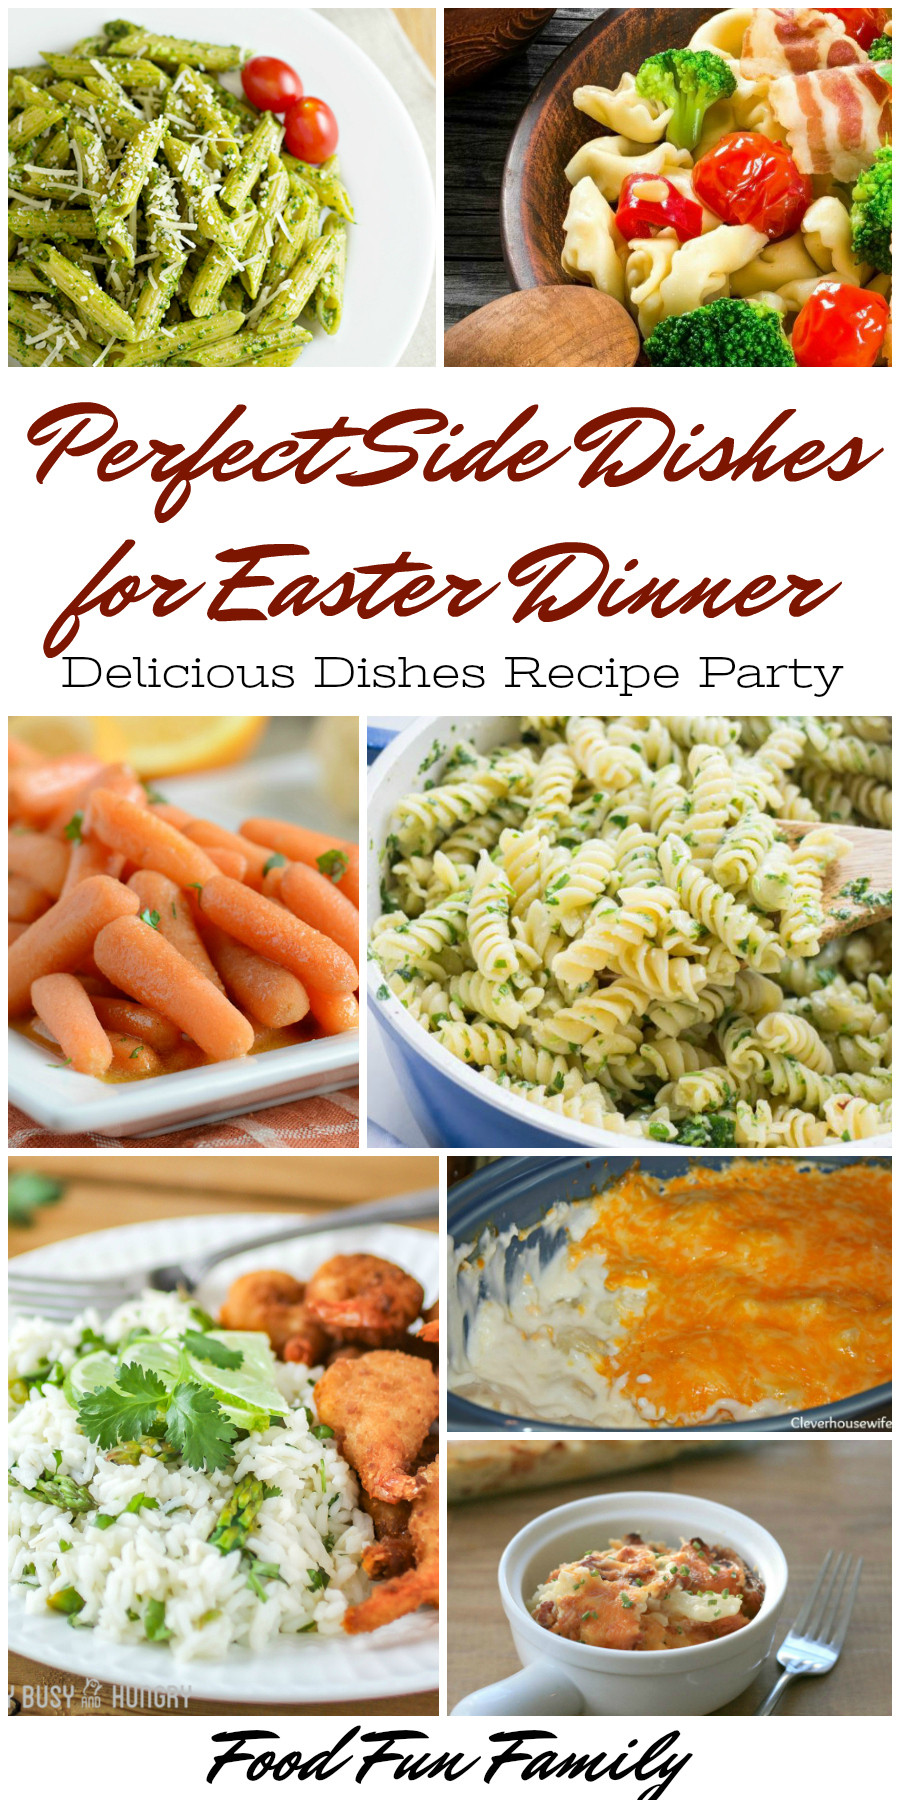 Easter Dinner Side Dishes
 Perfect Side Dishes for Easter Dinner – Delicious Dishes